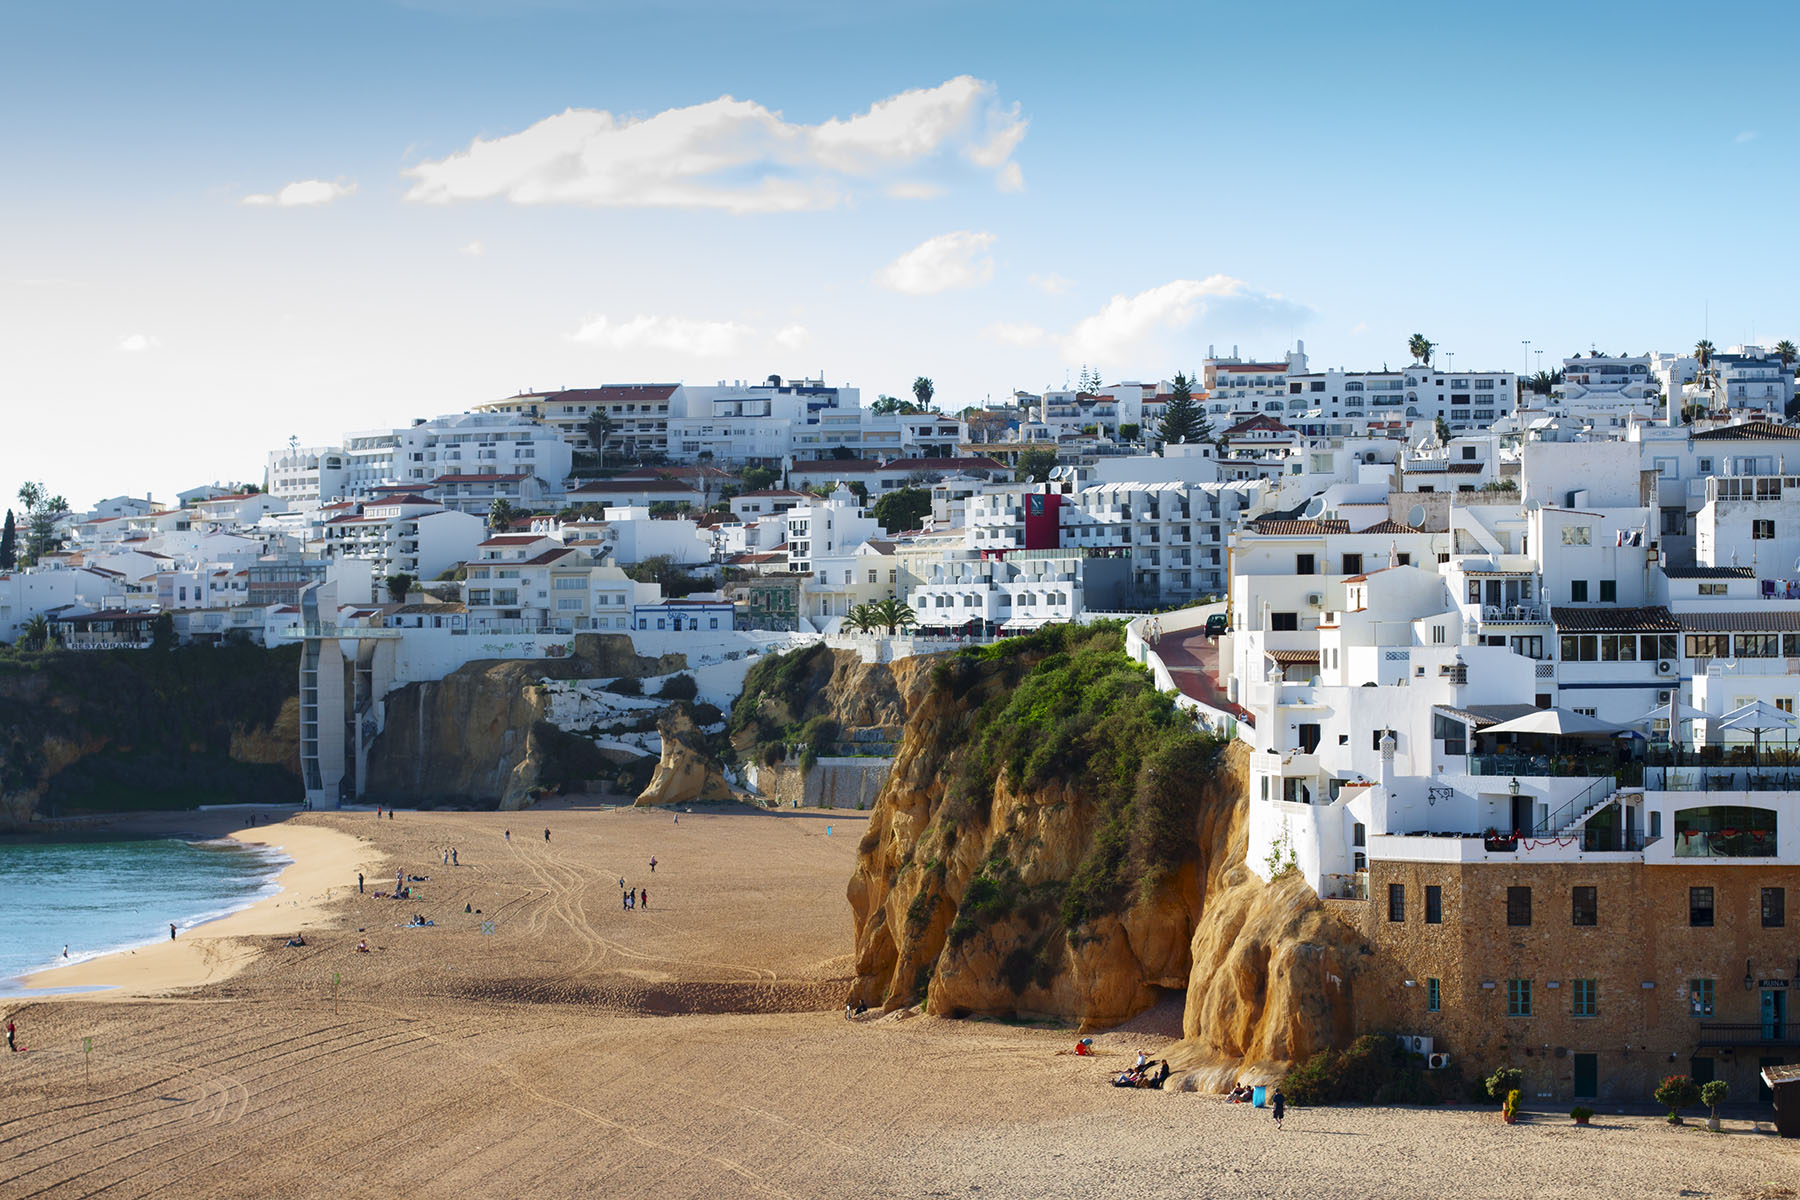 Beautiful sandy beach and sea side town of Albufeira in the Algarve province of Portugal.